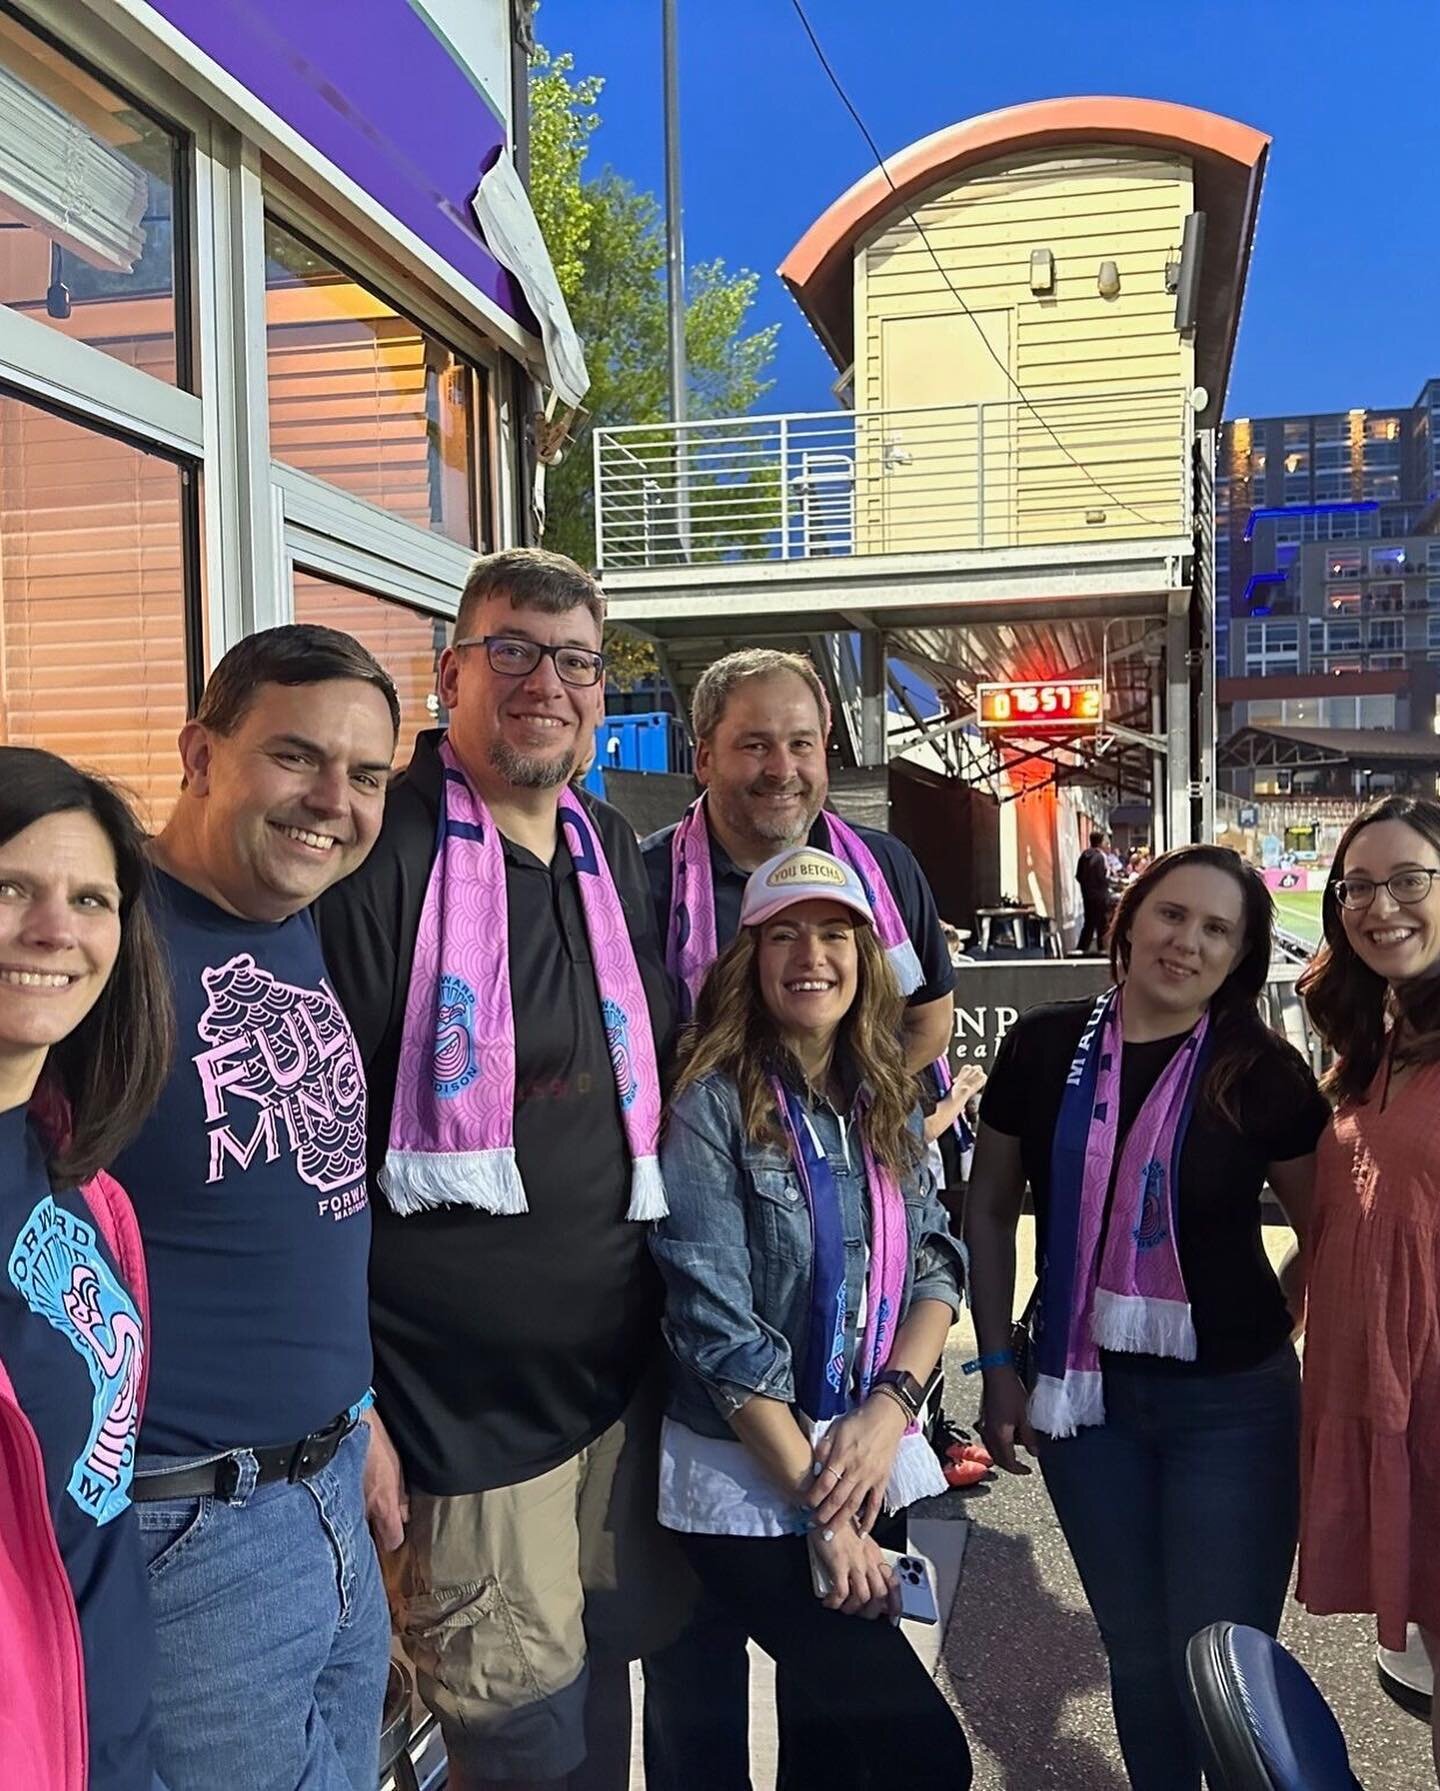 Last week, we celebrated Functionaire's 5th year with clients &amp; fans. The @forwardmadisonfc game ⚽ and beautiful spring evening was the perfect backdrop to the occasion. Huge THANKS to all that attended and to all folks near &amp; far whose suppo